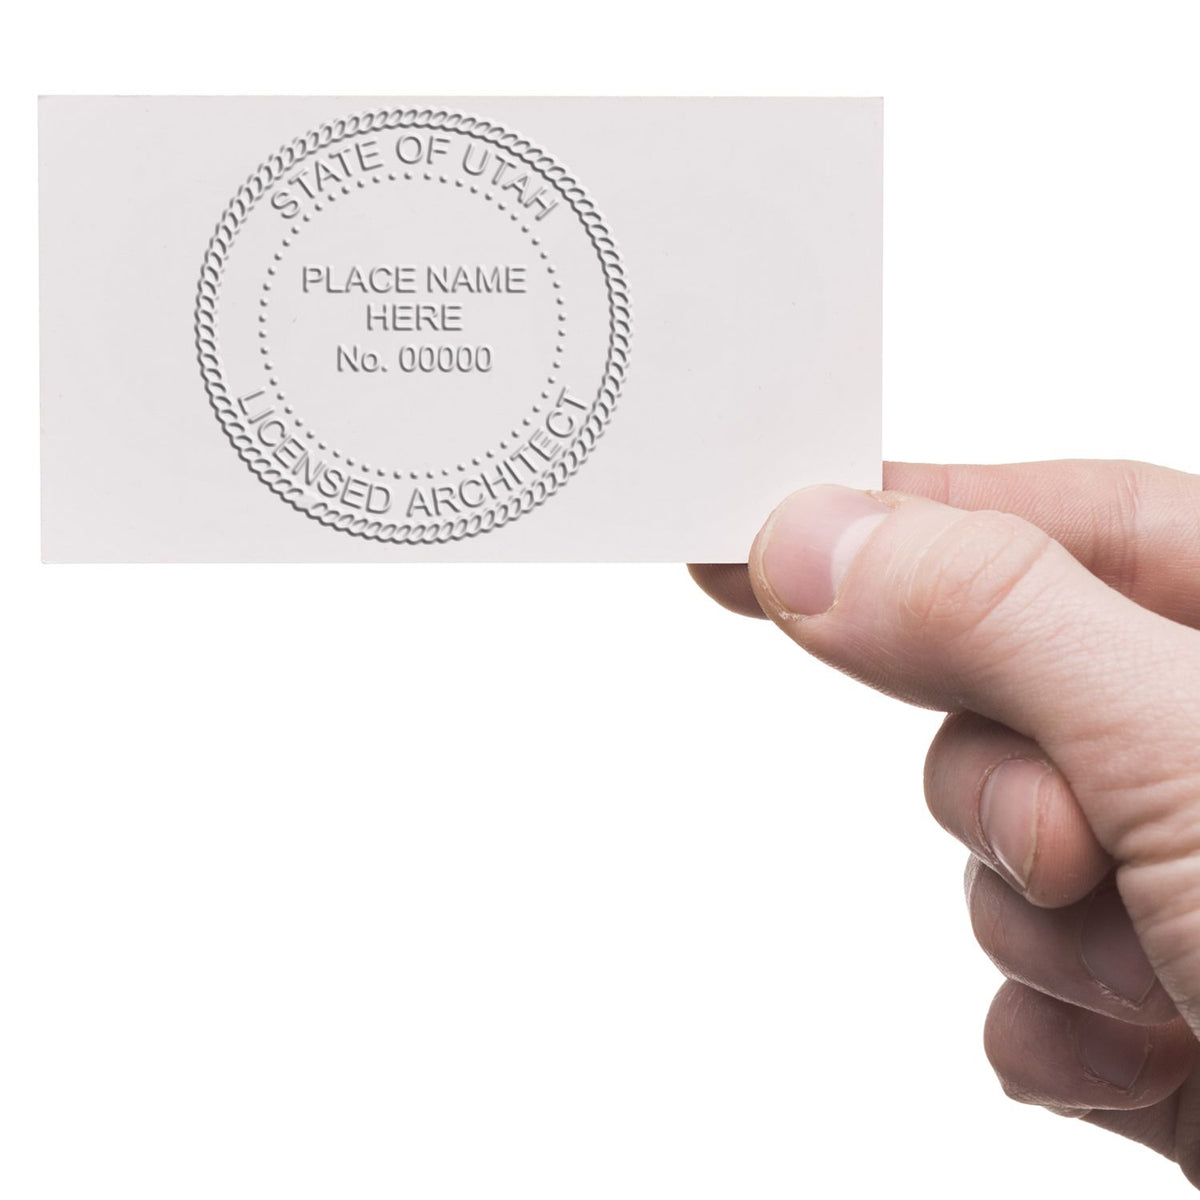 This paper is stamped with a sample imprint of the Handheld Utah Architect Seal Embosser, signifying its quality and reliability.